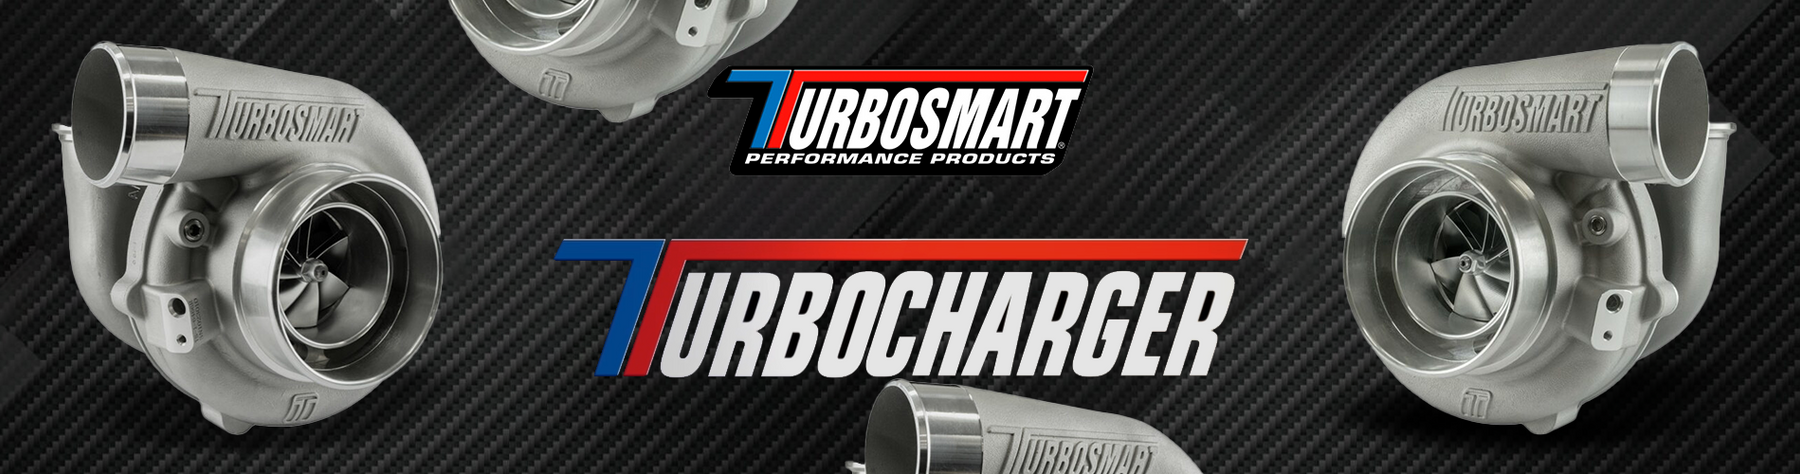 What are Turbosmart turbochargers?